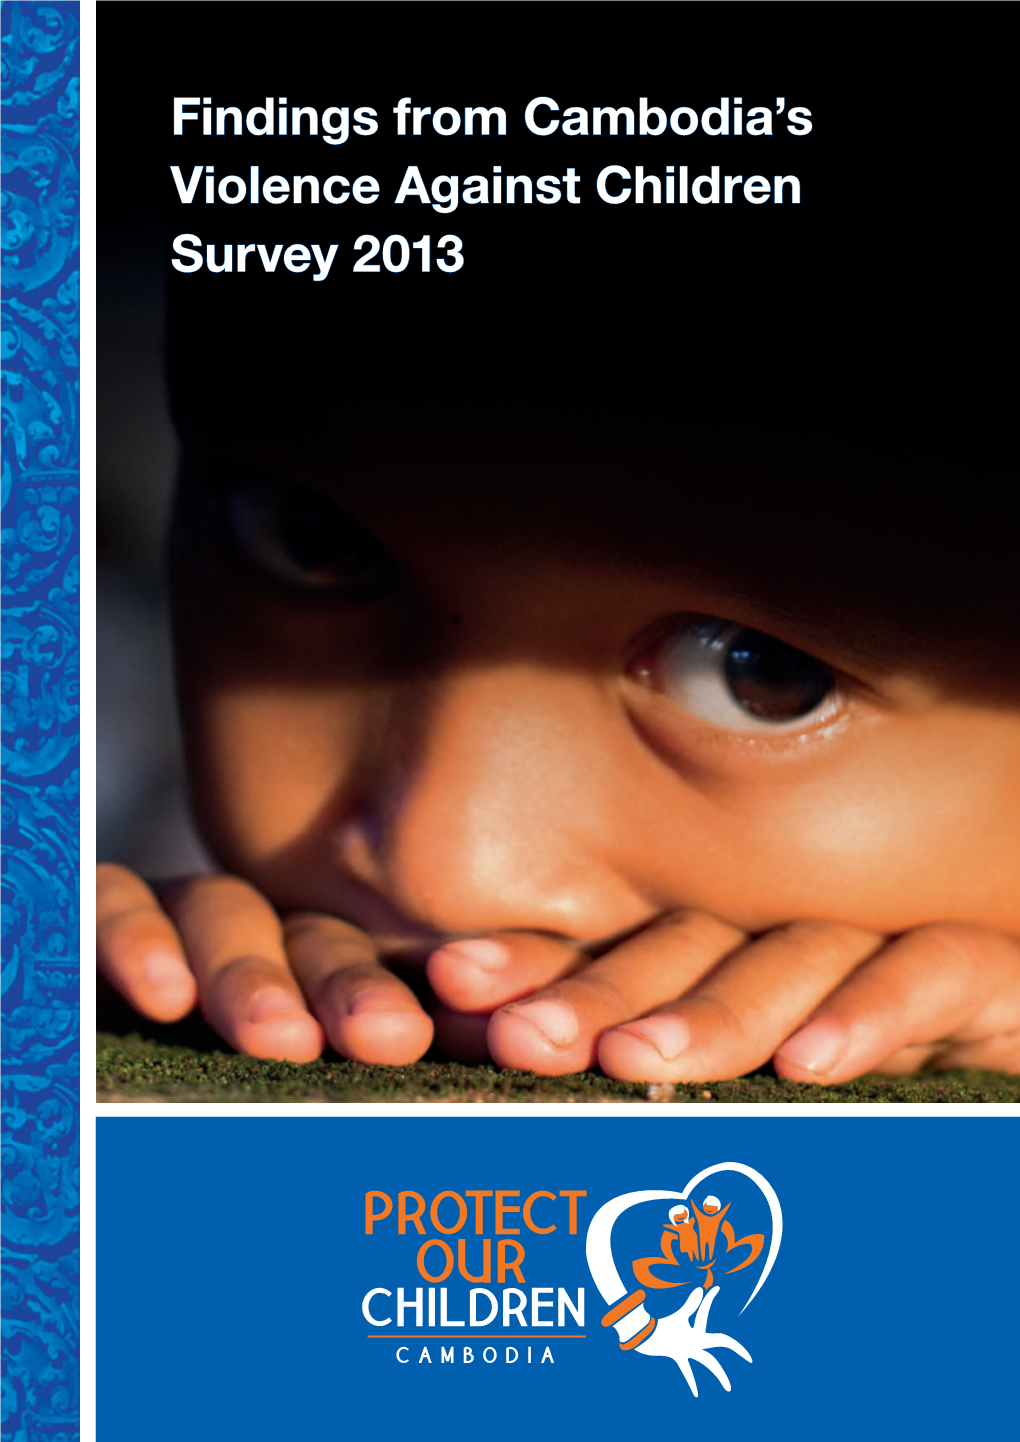 Findings from Cambodia's Violence Against Children Survey 2013